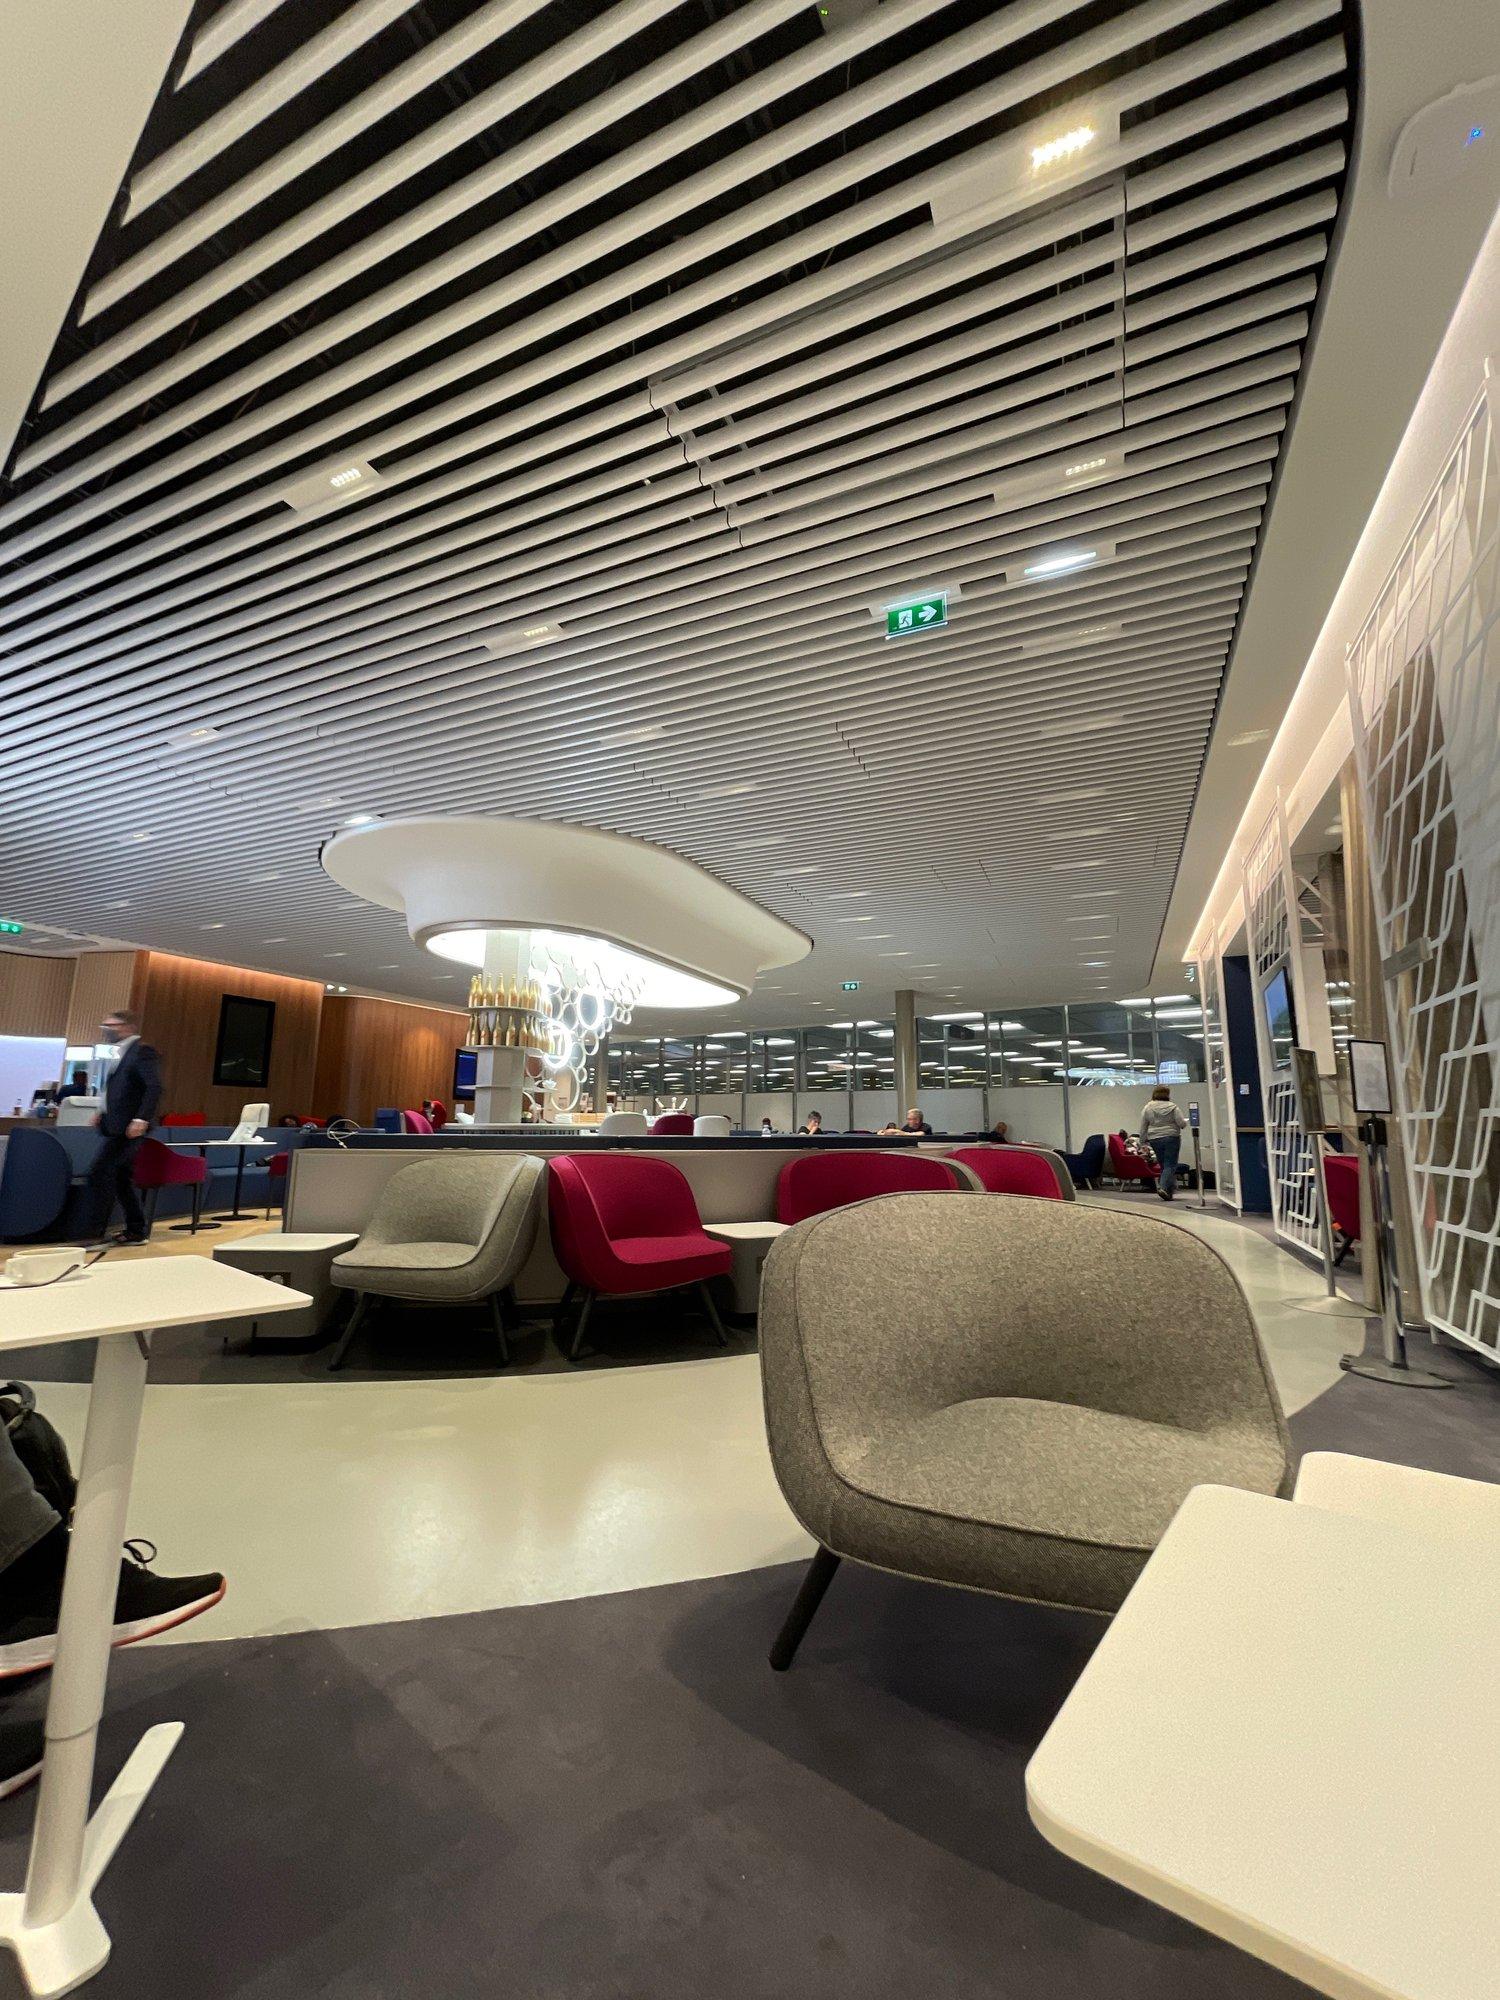 Air France Lounge image 1 of 1